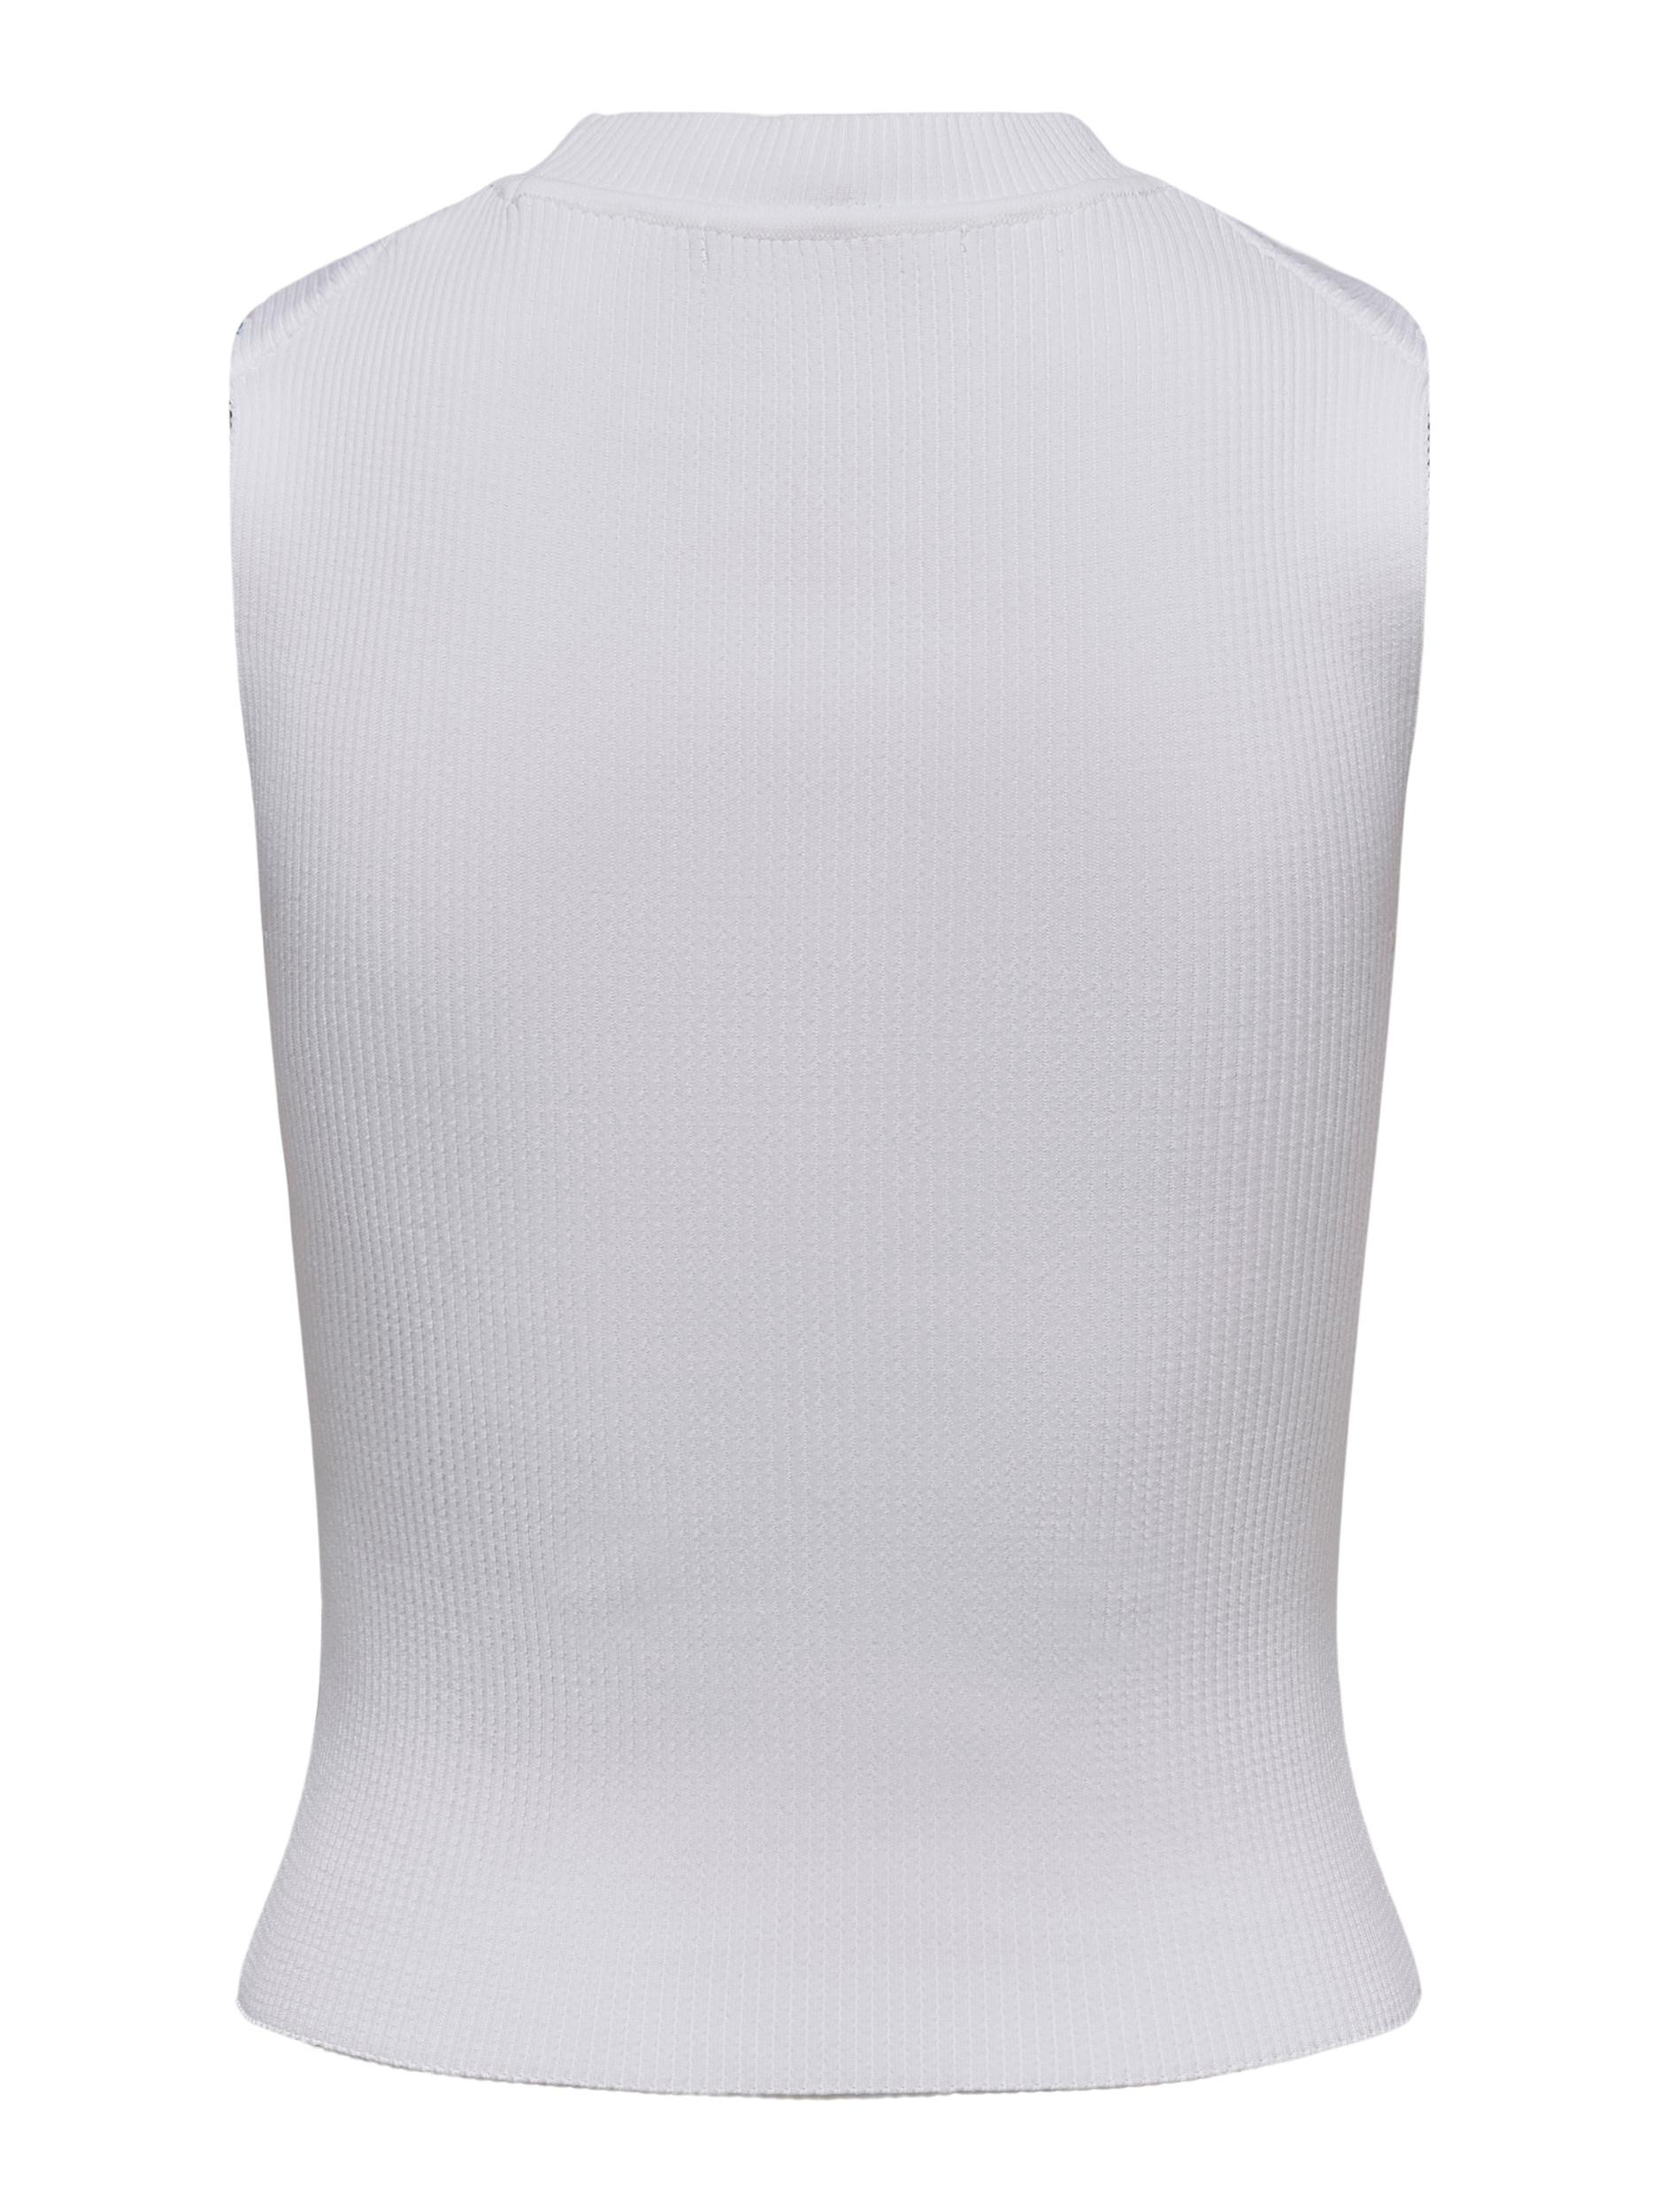 Only - Top in maglia, Bianco, large image number 1